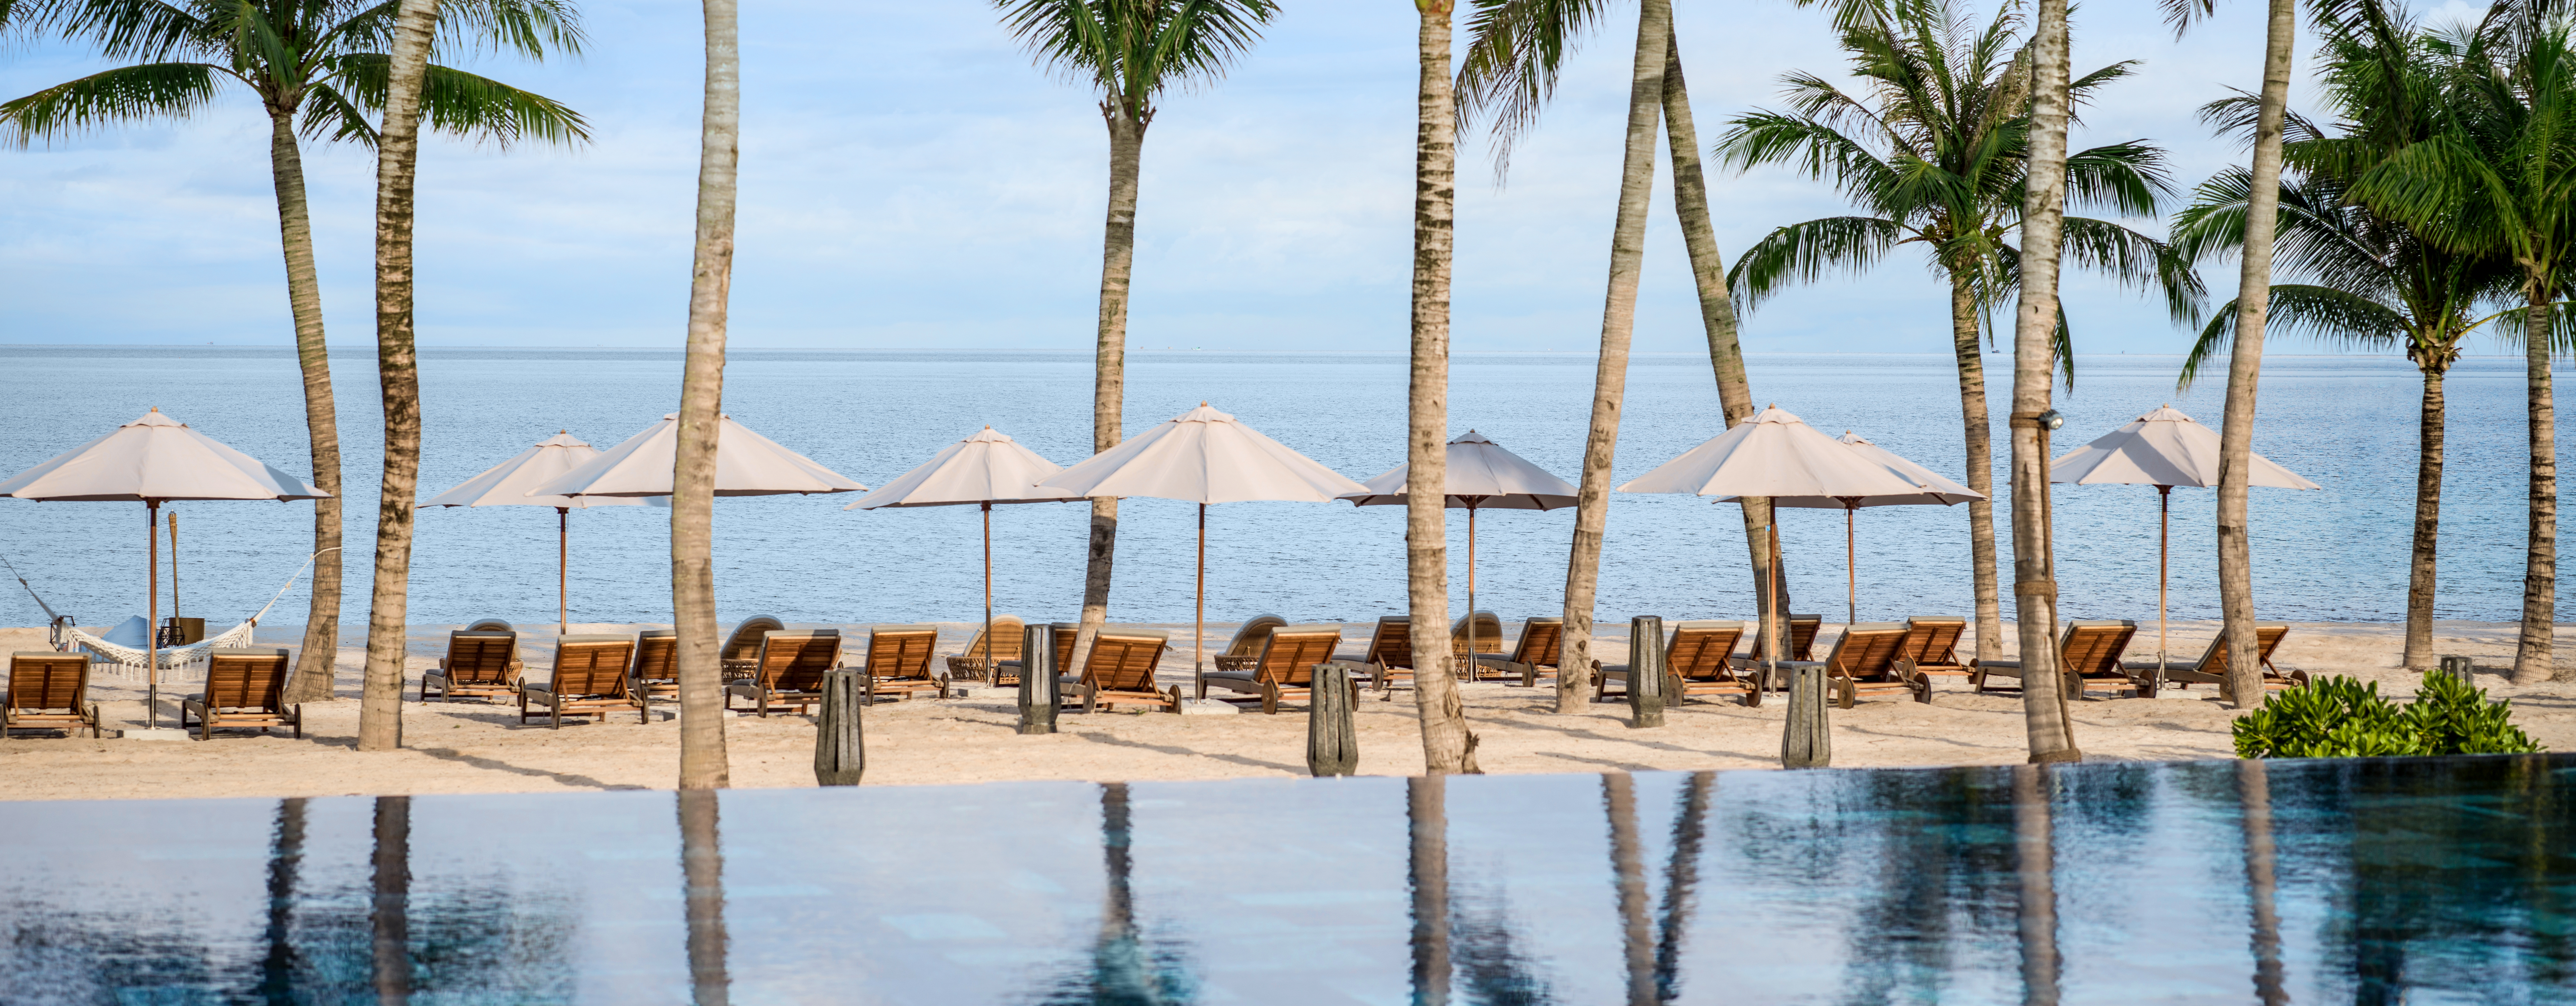 Infinity pool with length 120m at the New World Phu Quoc Resort